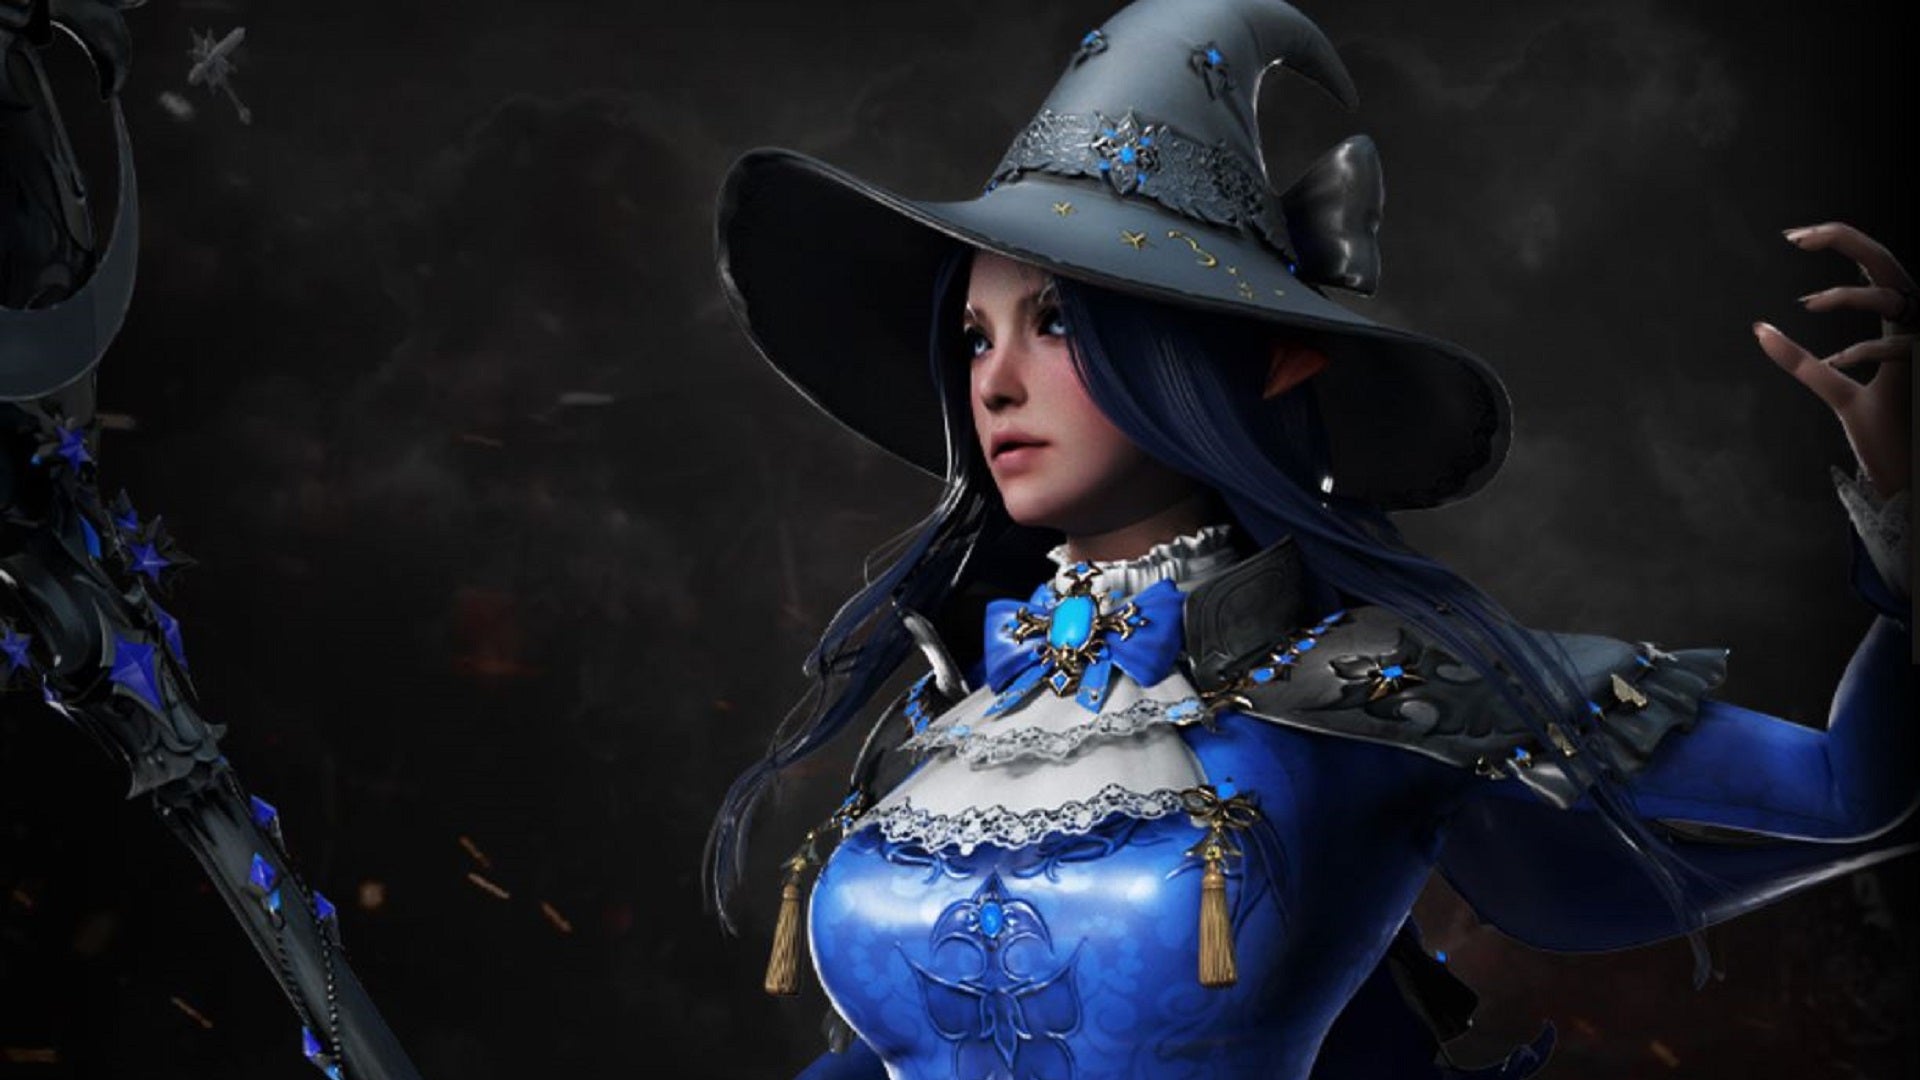 The default image of a Sorceress class character from Lost Ark.